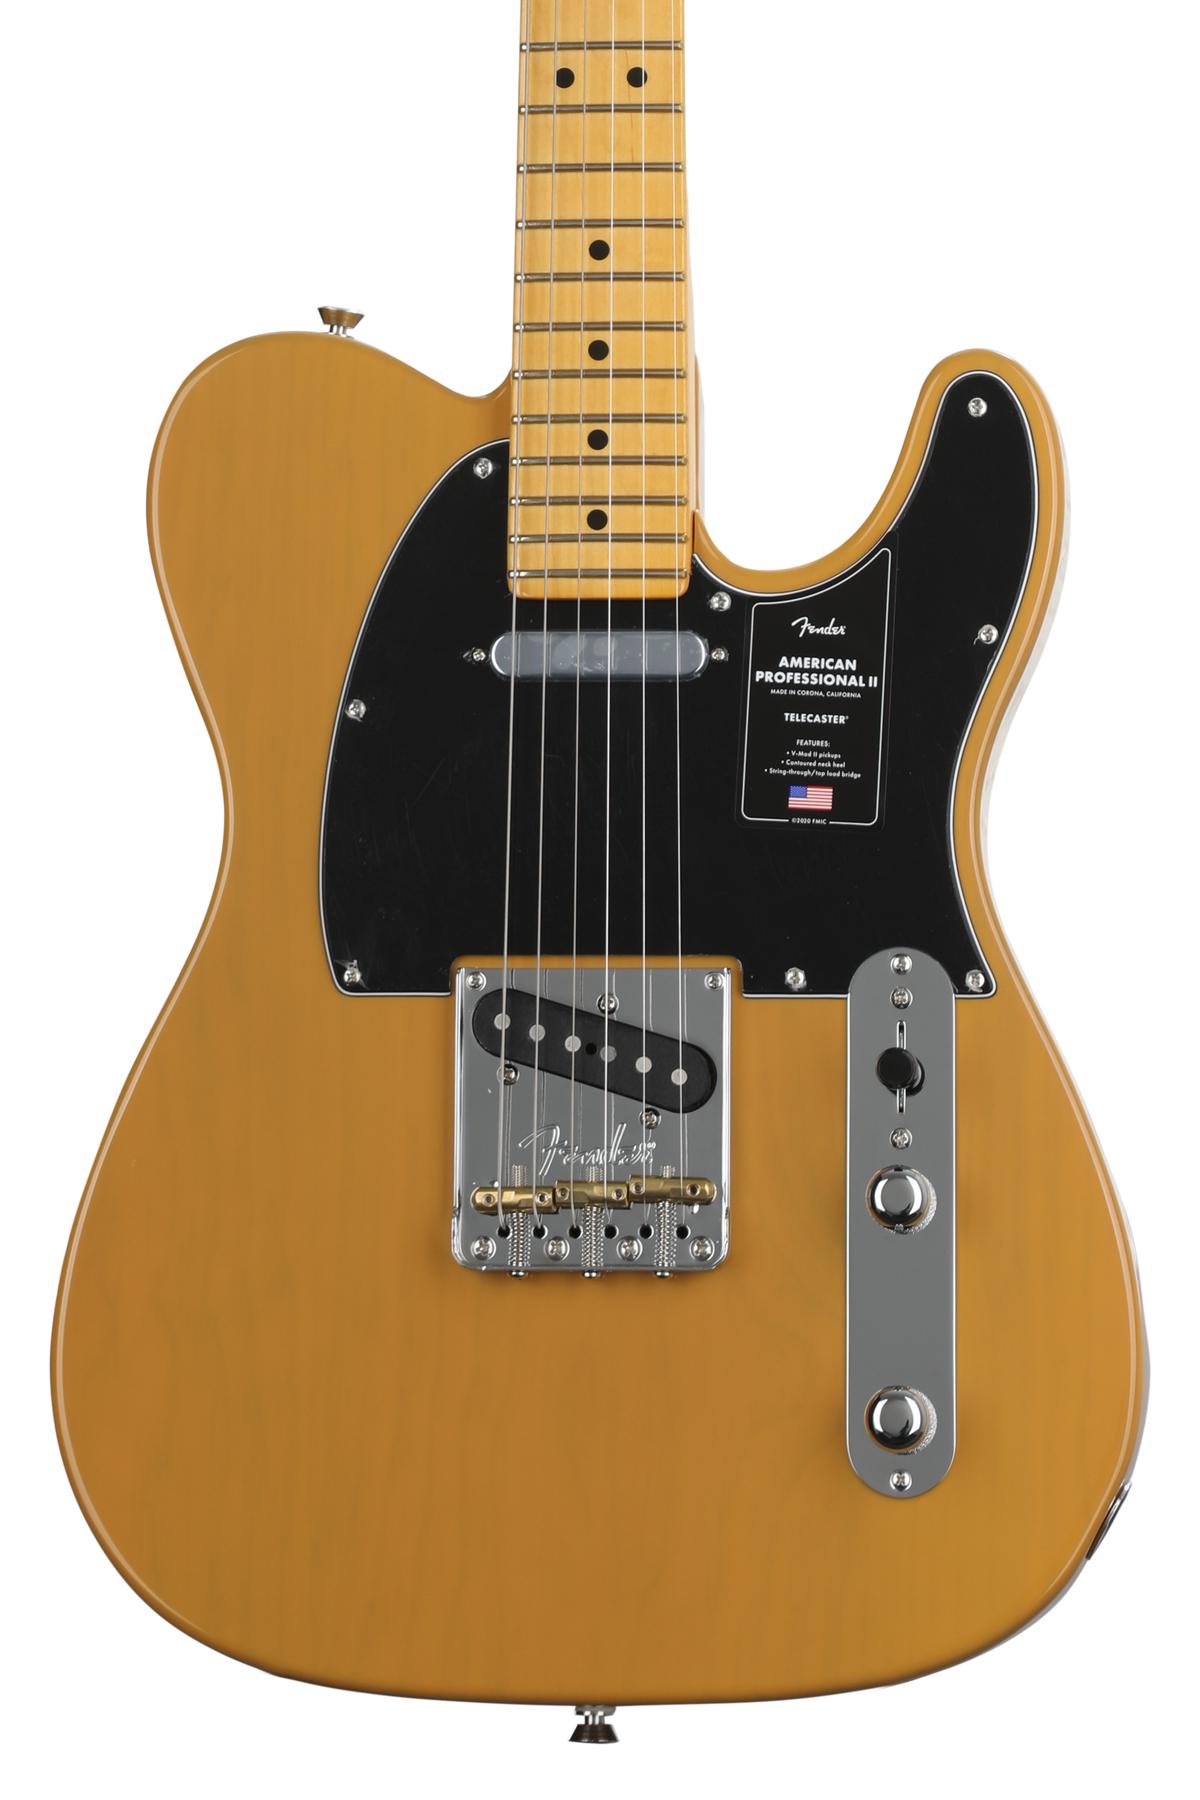 American Professional Telecaster II by Fender